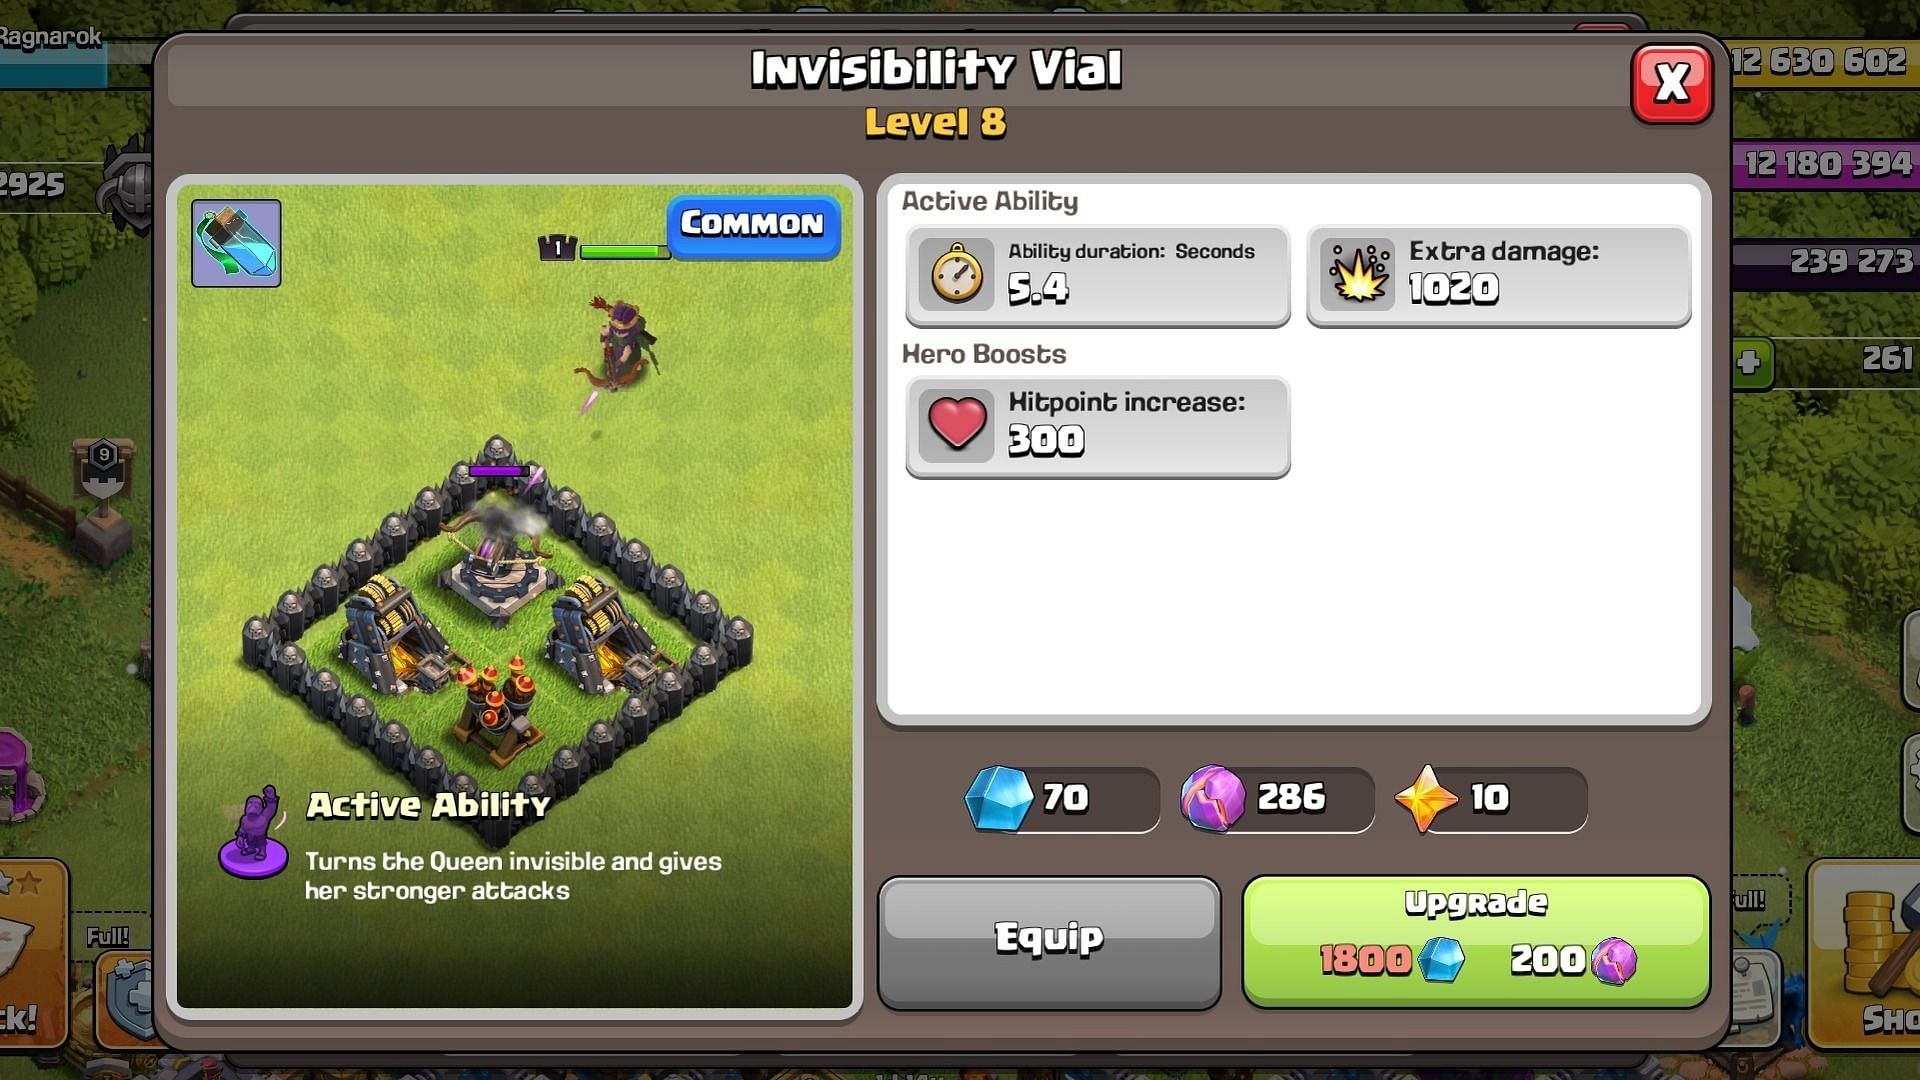 Invisibility Vial stats (Image via Supercell)